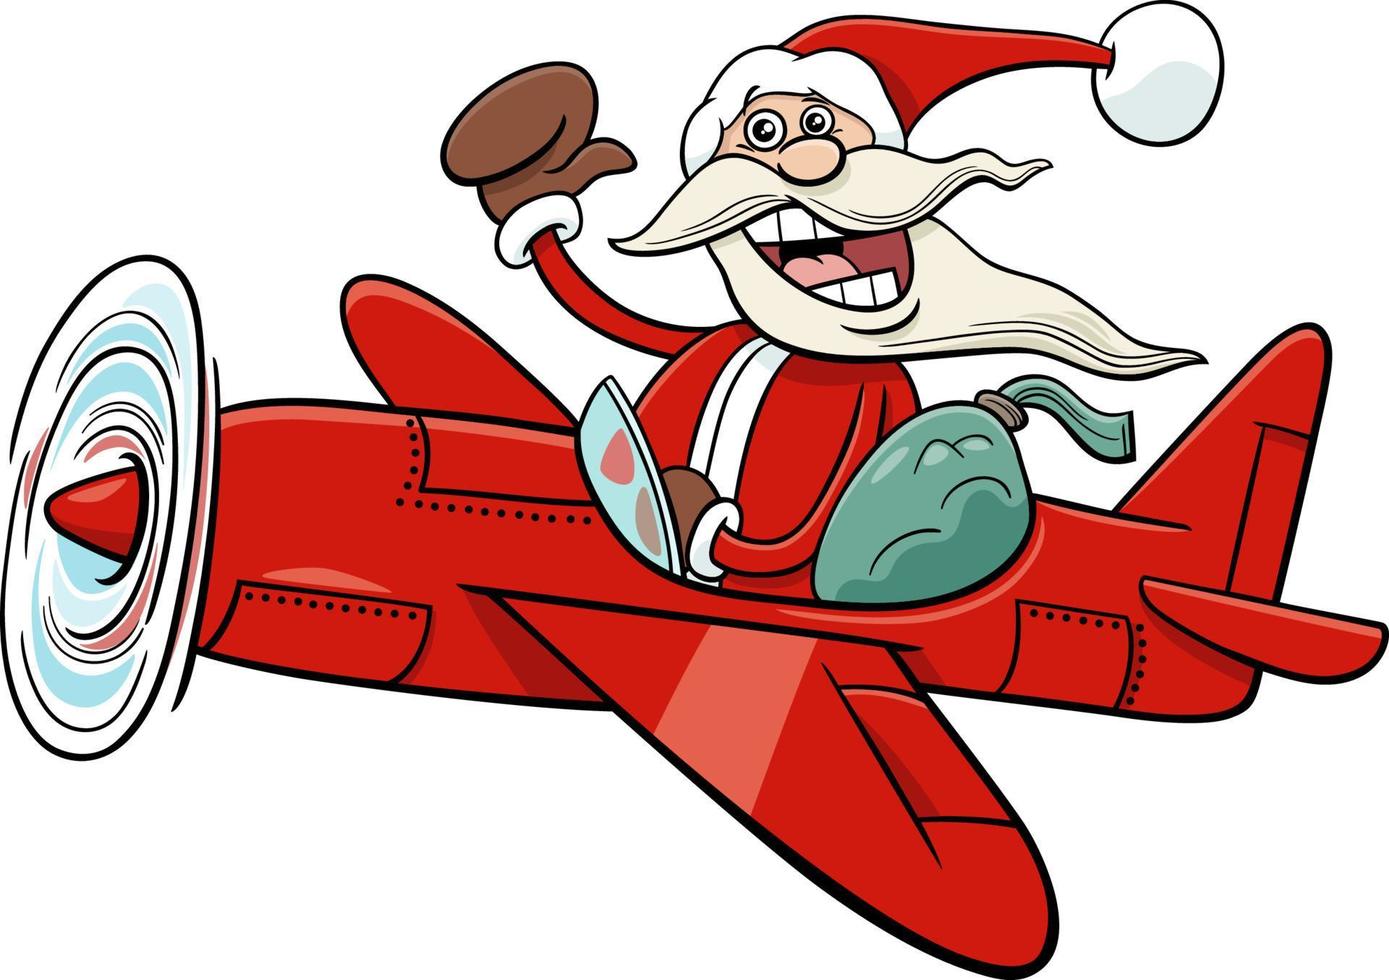 cartoon Santa Claus character in the plane on Christmas time vector